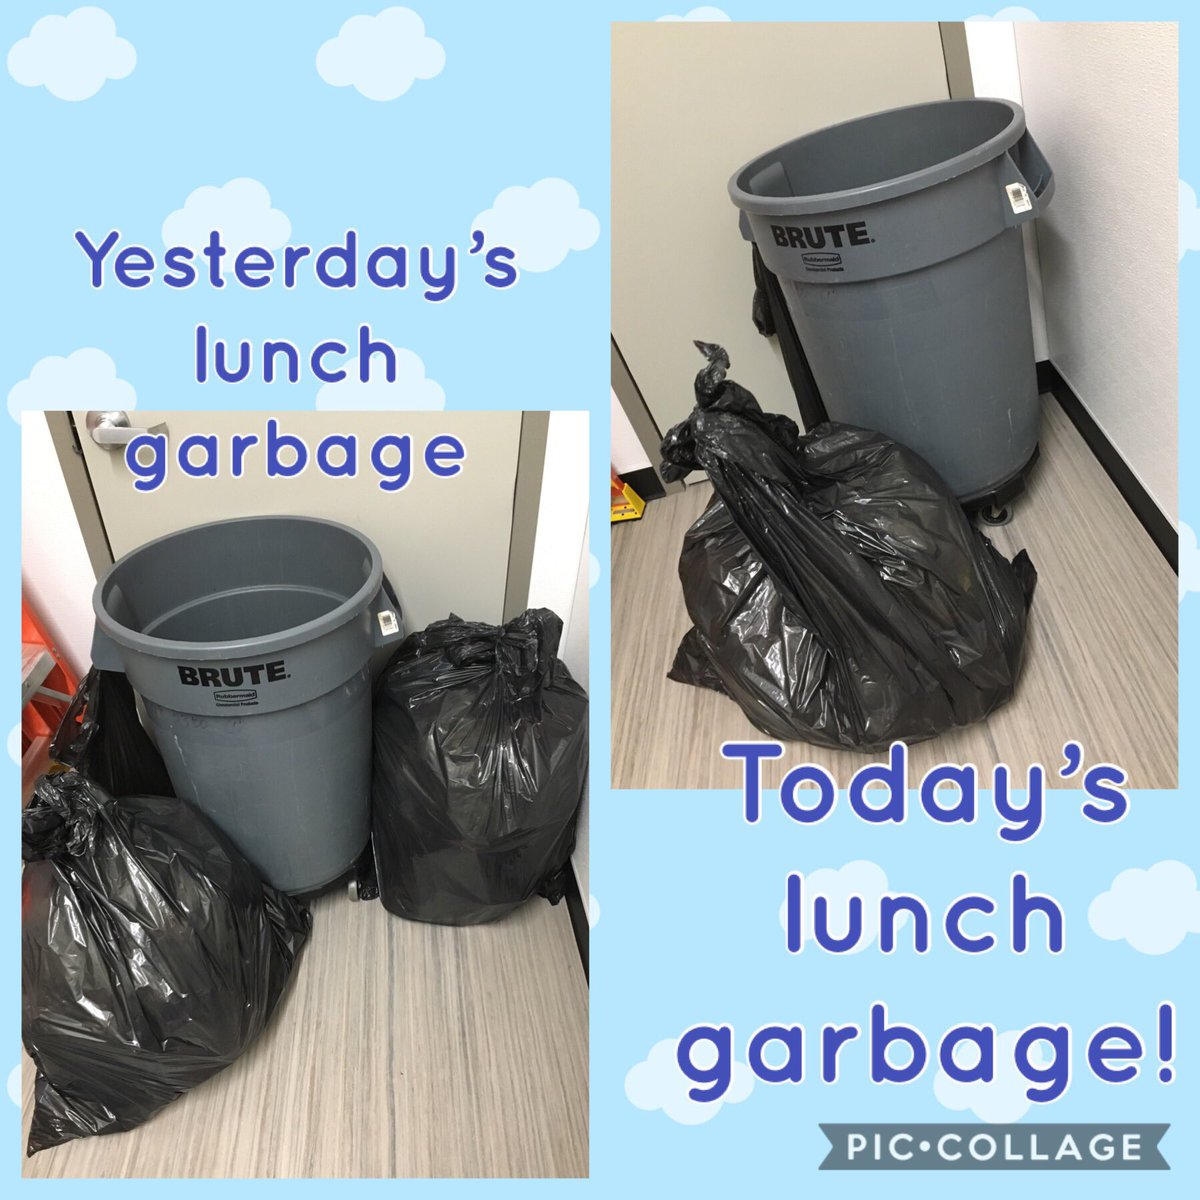 One more look at the success of our #litterlesslunch! #Garbage! #EarthDay #P3EarthDayChallenge